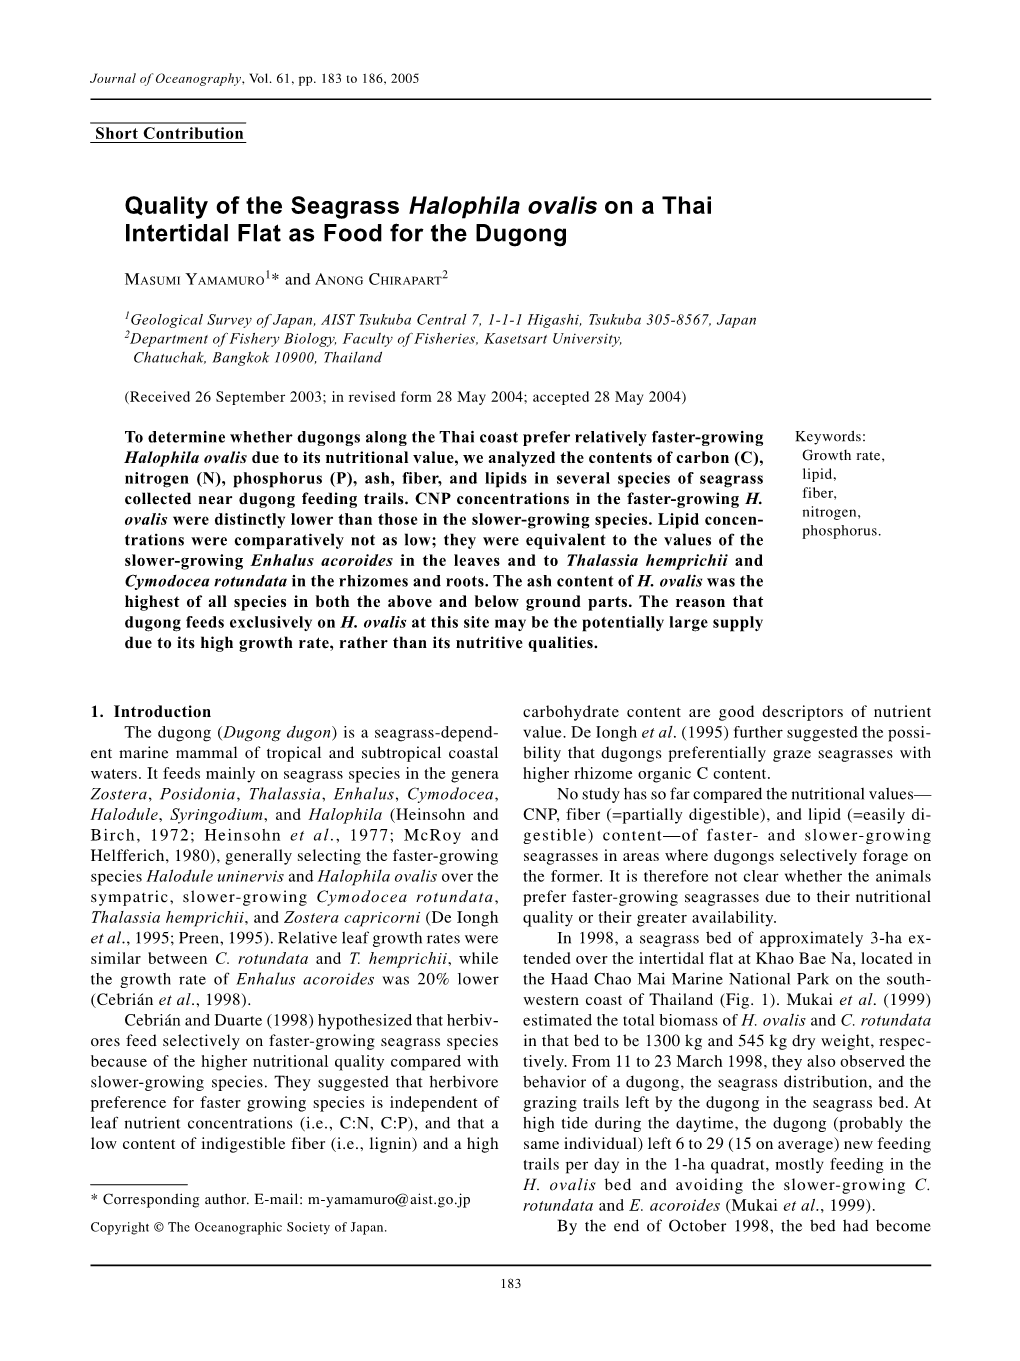 Quality of the Seagrass Halophila Ovalis on a Thai Intertidal Flat As Food for the Dugong